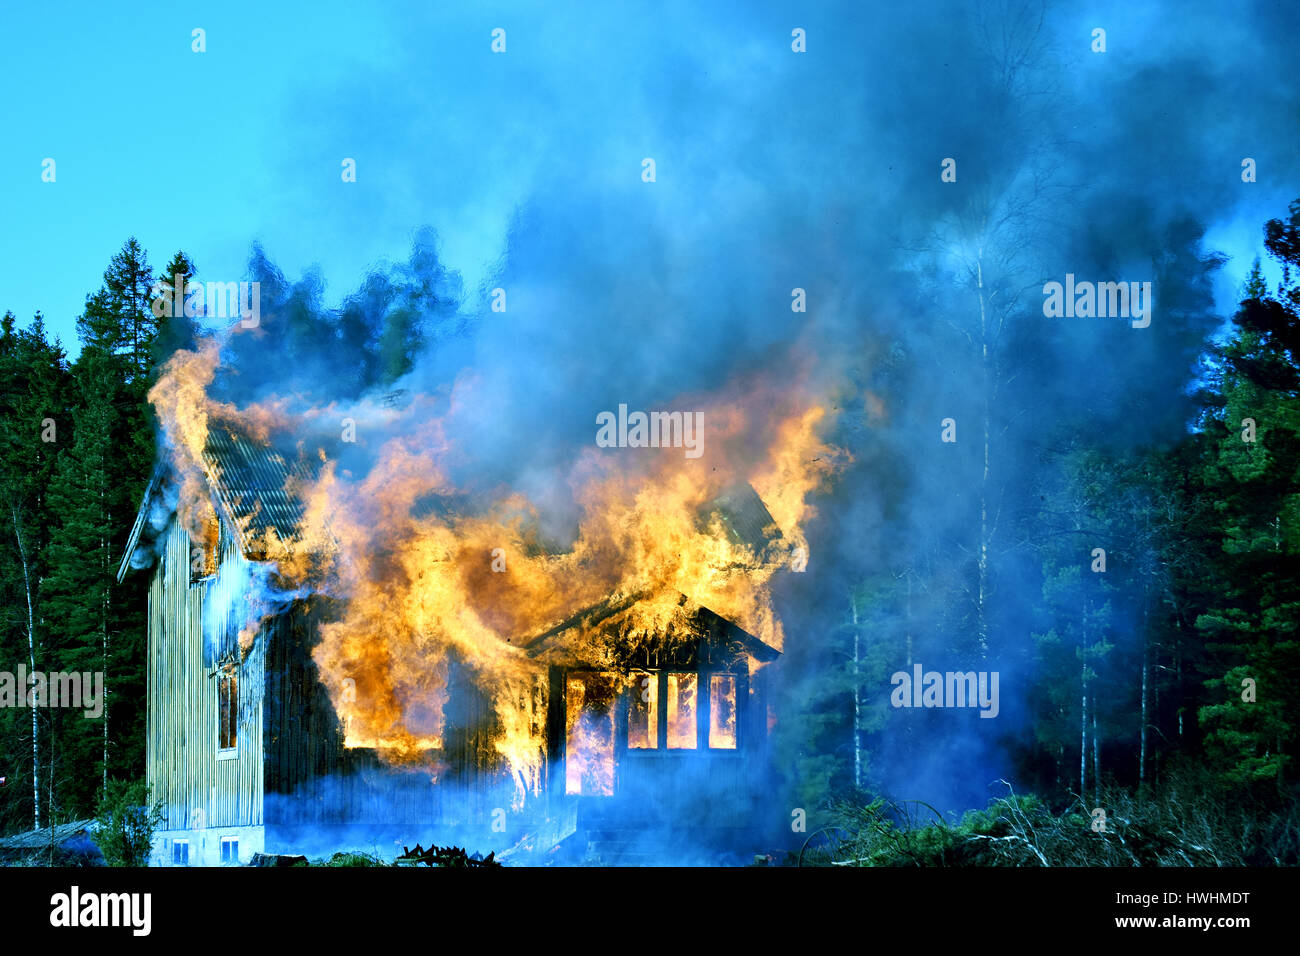 Burning home. House completely engulfed in flames Stock Photo